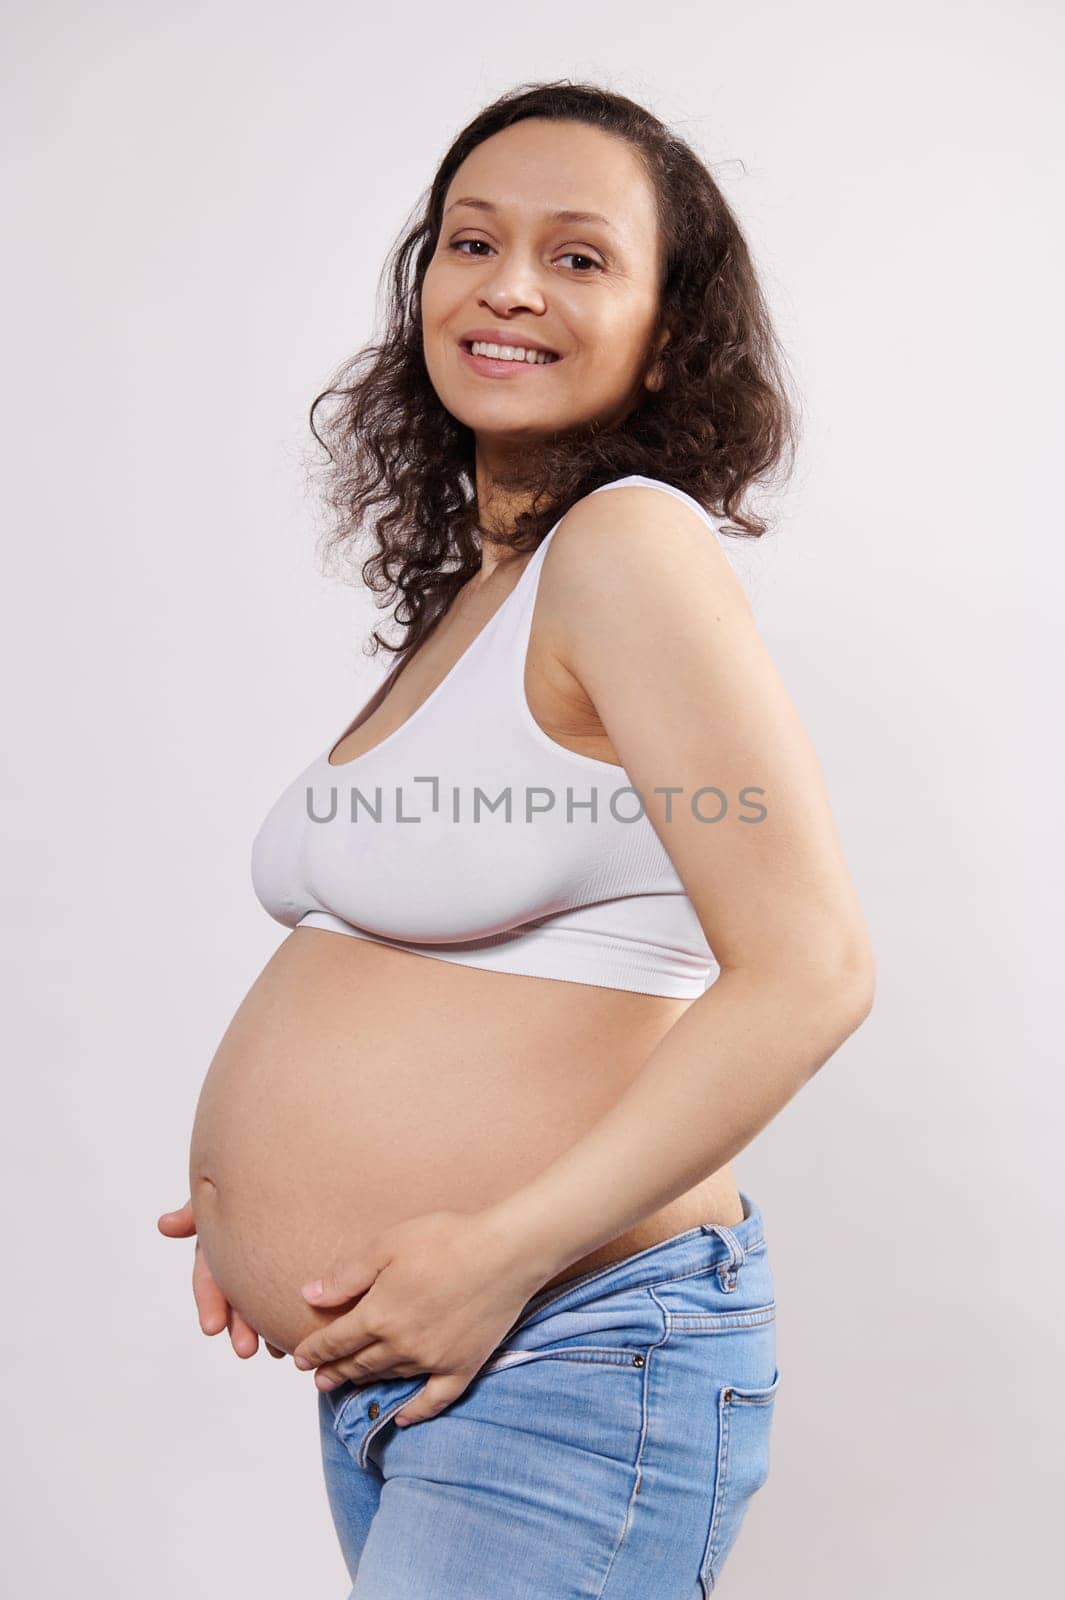 Attractive happy pregnant ethnic woman holding hands on her tummy, smiling looking at camera, isolated white background. by artgf